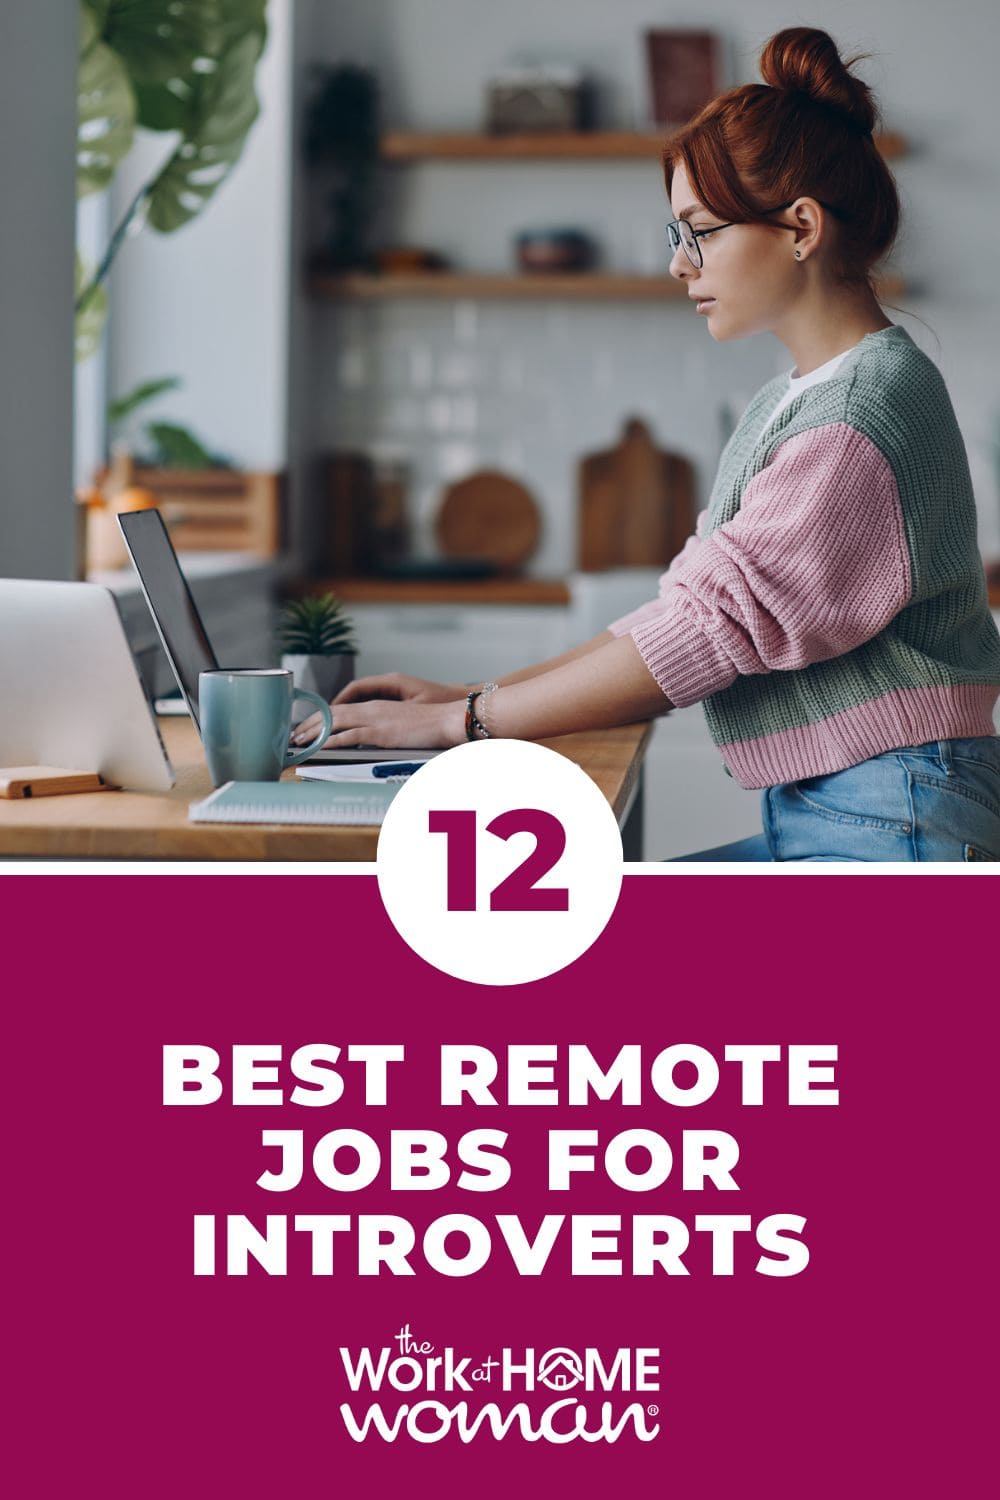 Are you introverted? Would you like to work from home all by yourself? Here are the 12 best remote jobs for introverts!